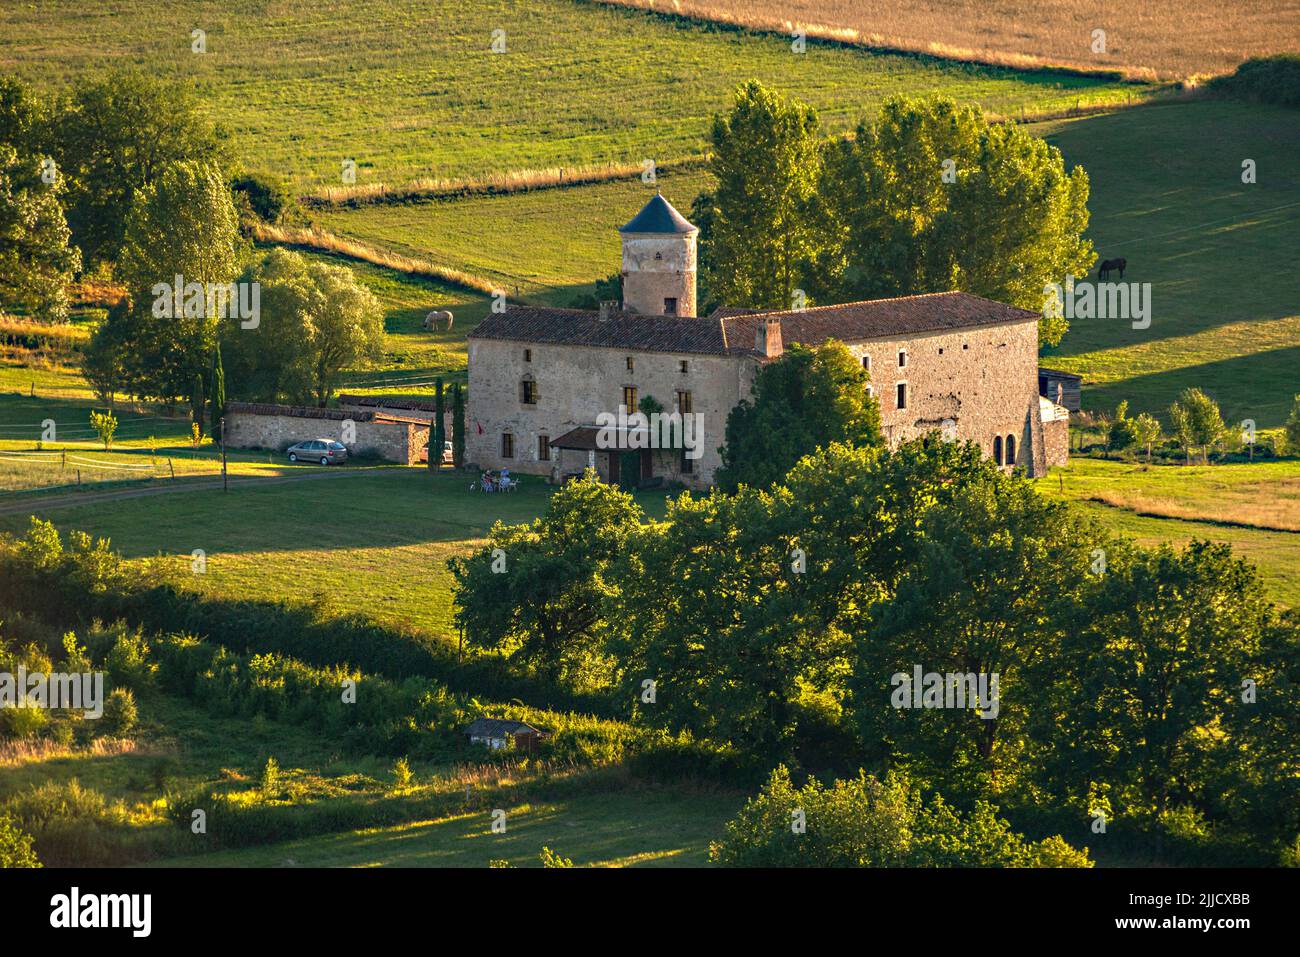 Summer alfresco setting at Malbosc, a medieval fortified farm at Cordes sur Ciel in the south of France. Stock Photo